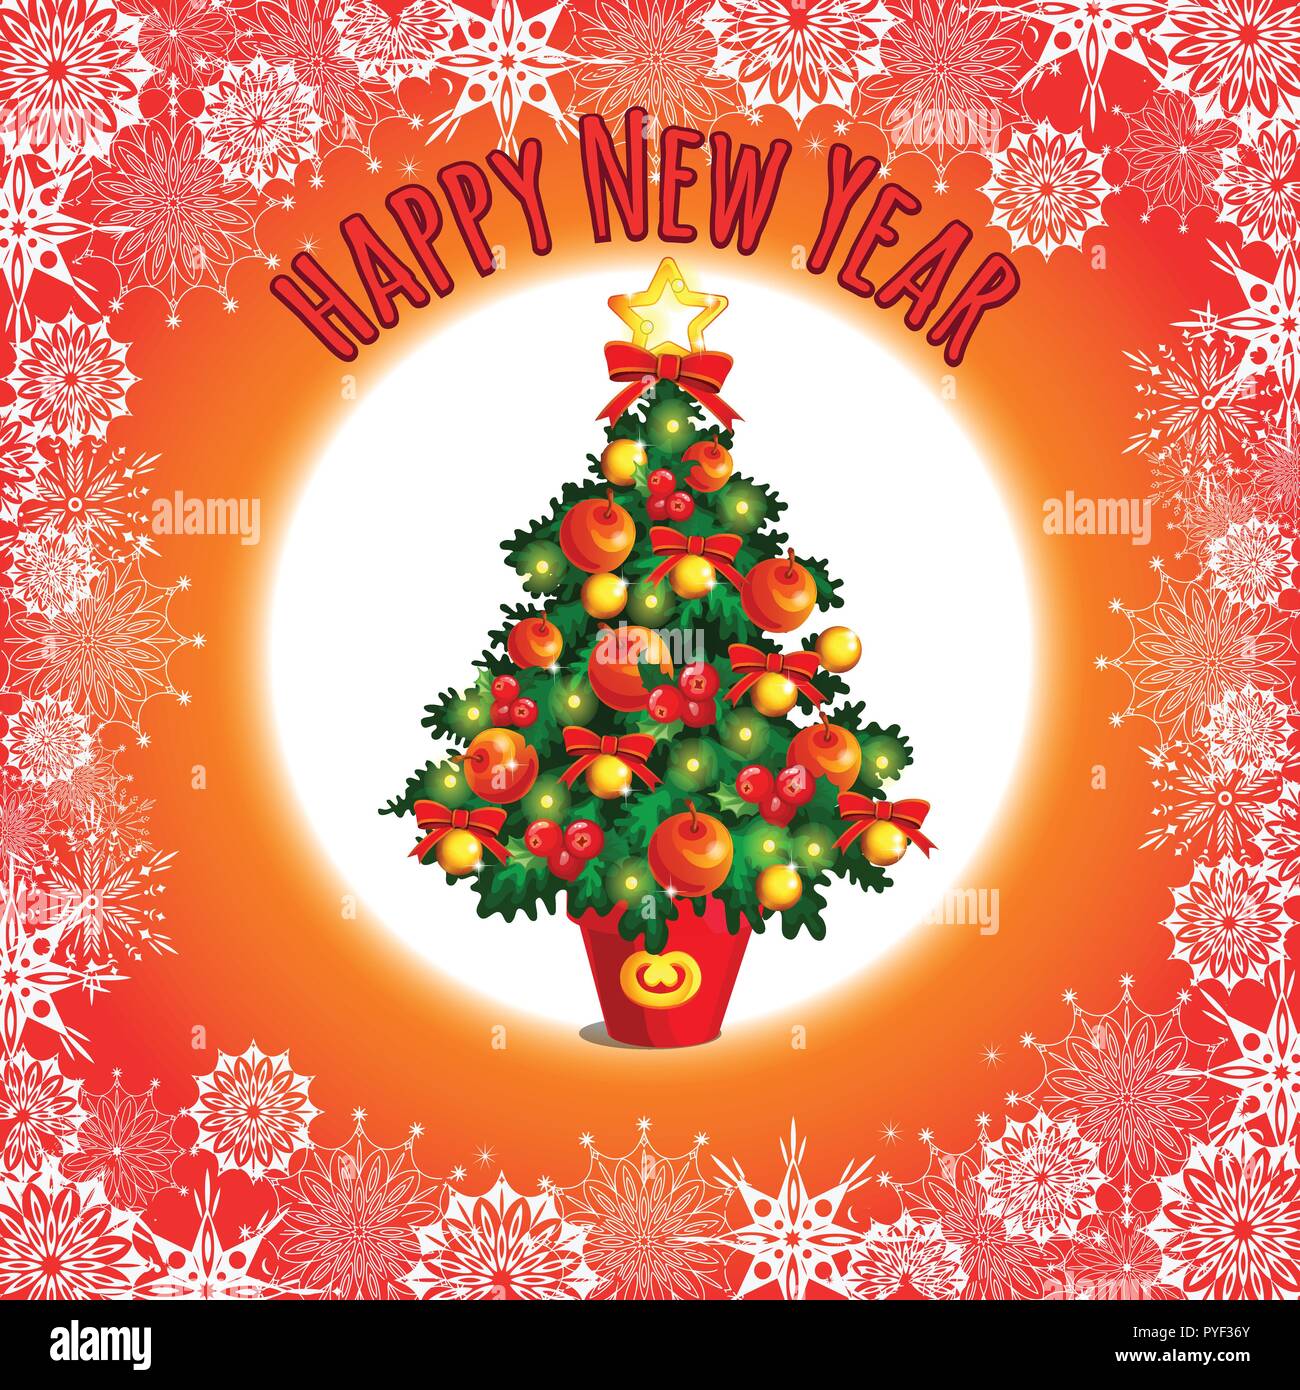 Sketch With Cute Christmas Tree With Red Ribbon Bow. New Year Gifts, Texture Of Snowflakes, Classic Christmas Decorations And Baubles. Sample Of Poster, Invitation And Other Card. Vector Illustration. Stock Vector